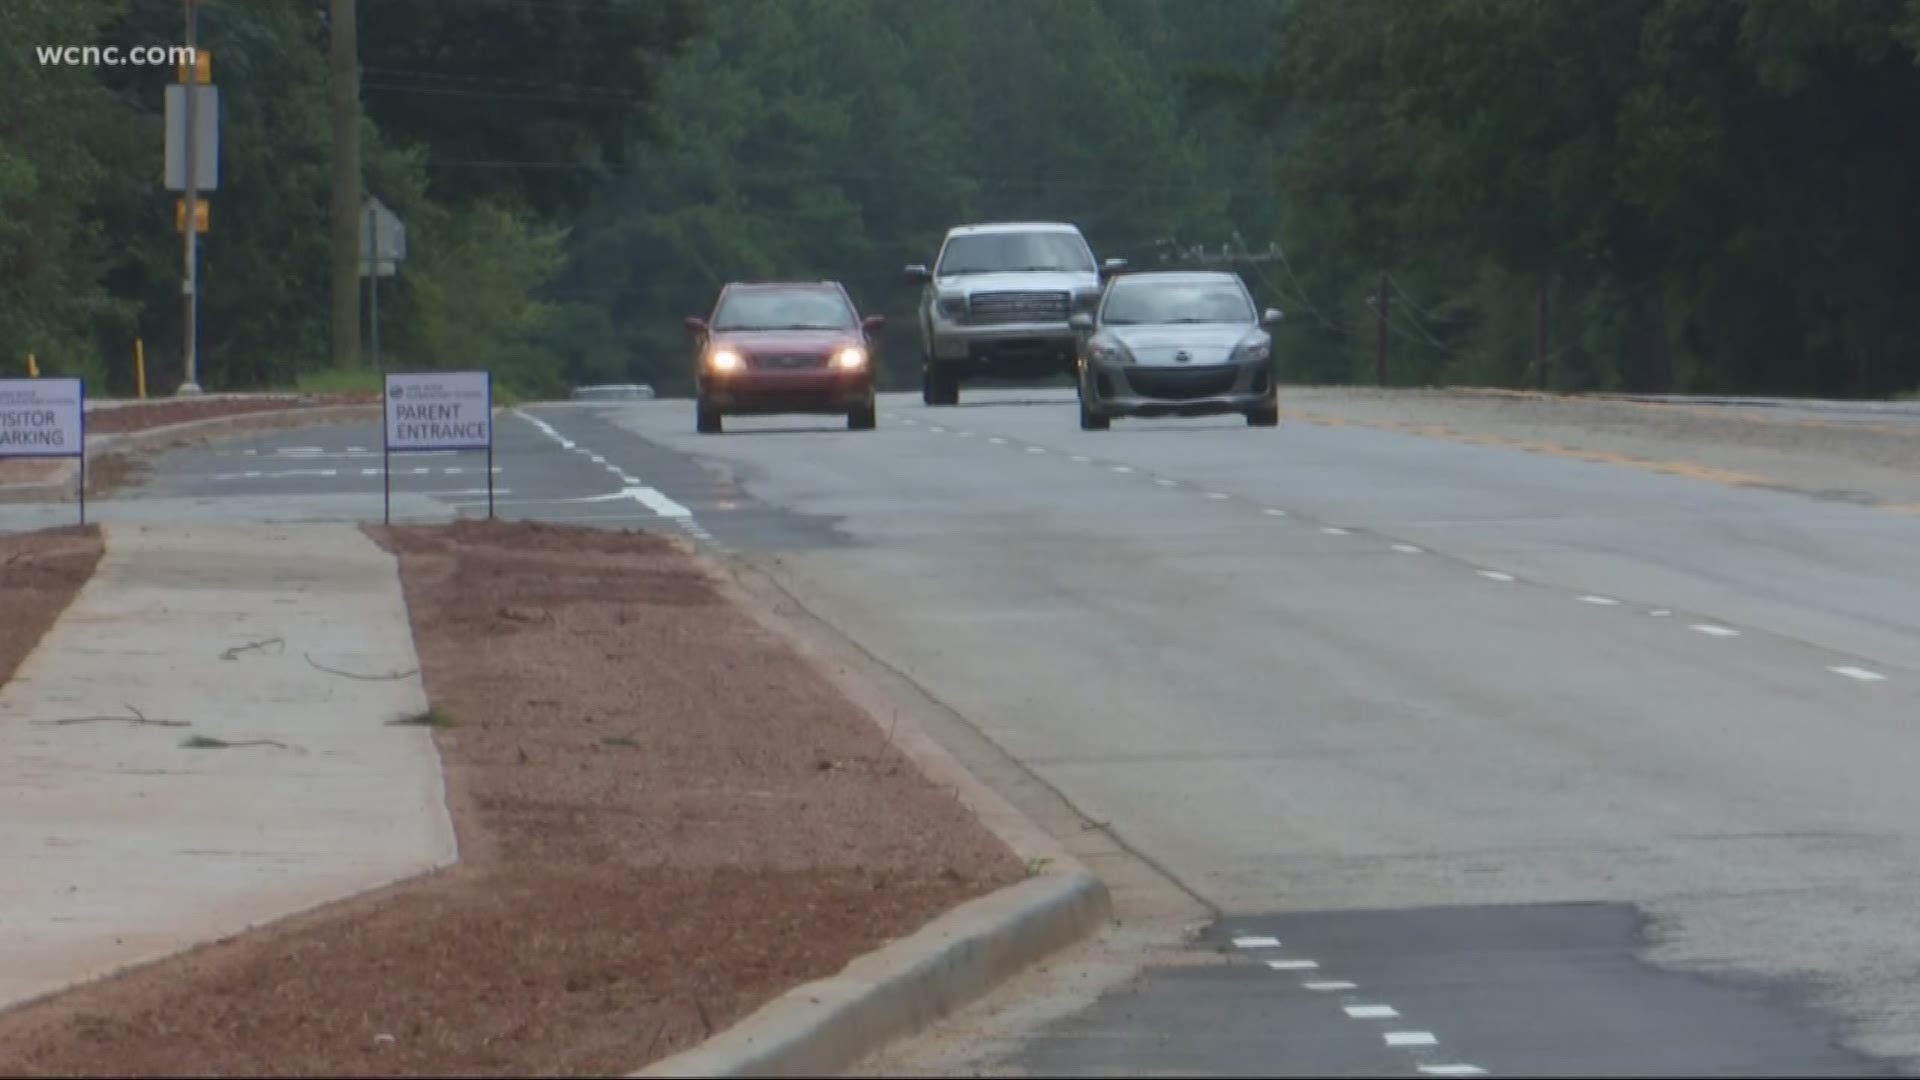 Concern over sidewalk's proximity to highway as classes resume